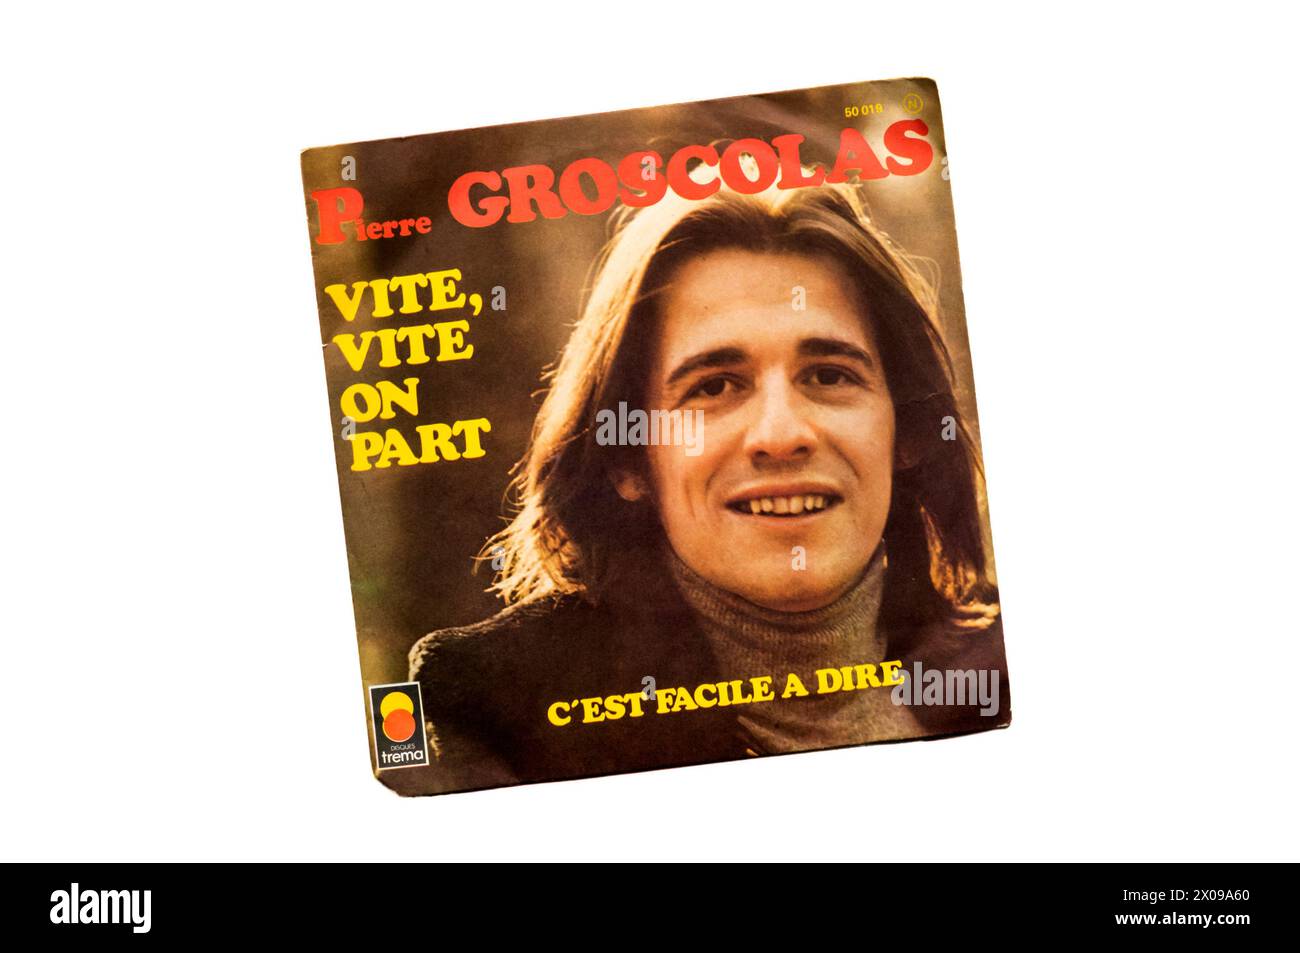 A 7' single of Vite,Vite on Part and C'est Facile a Dire by Pierre Groscolas. Released in 1974. Stock Photo